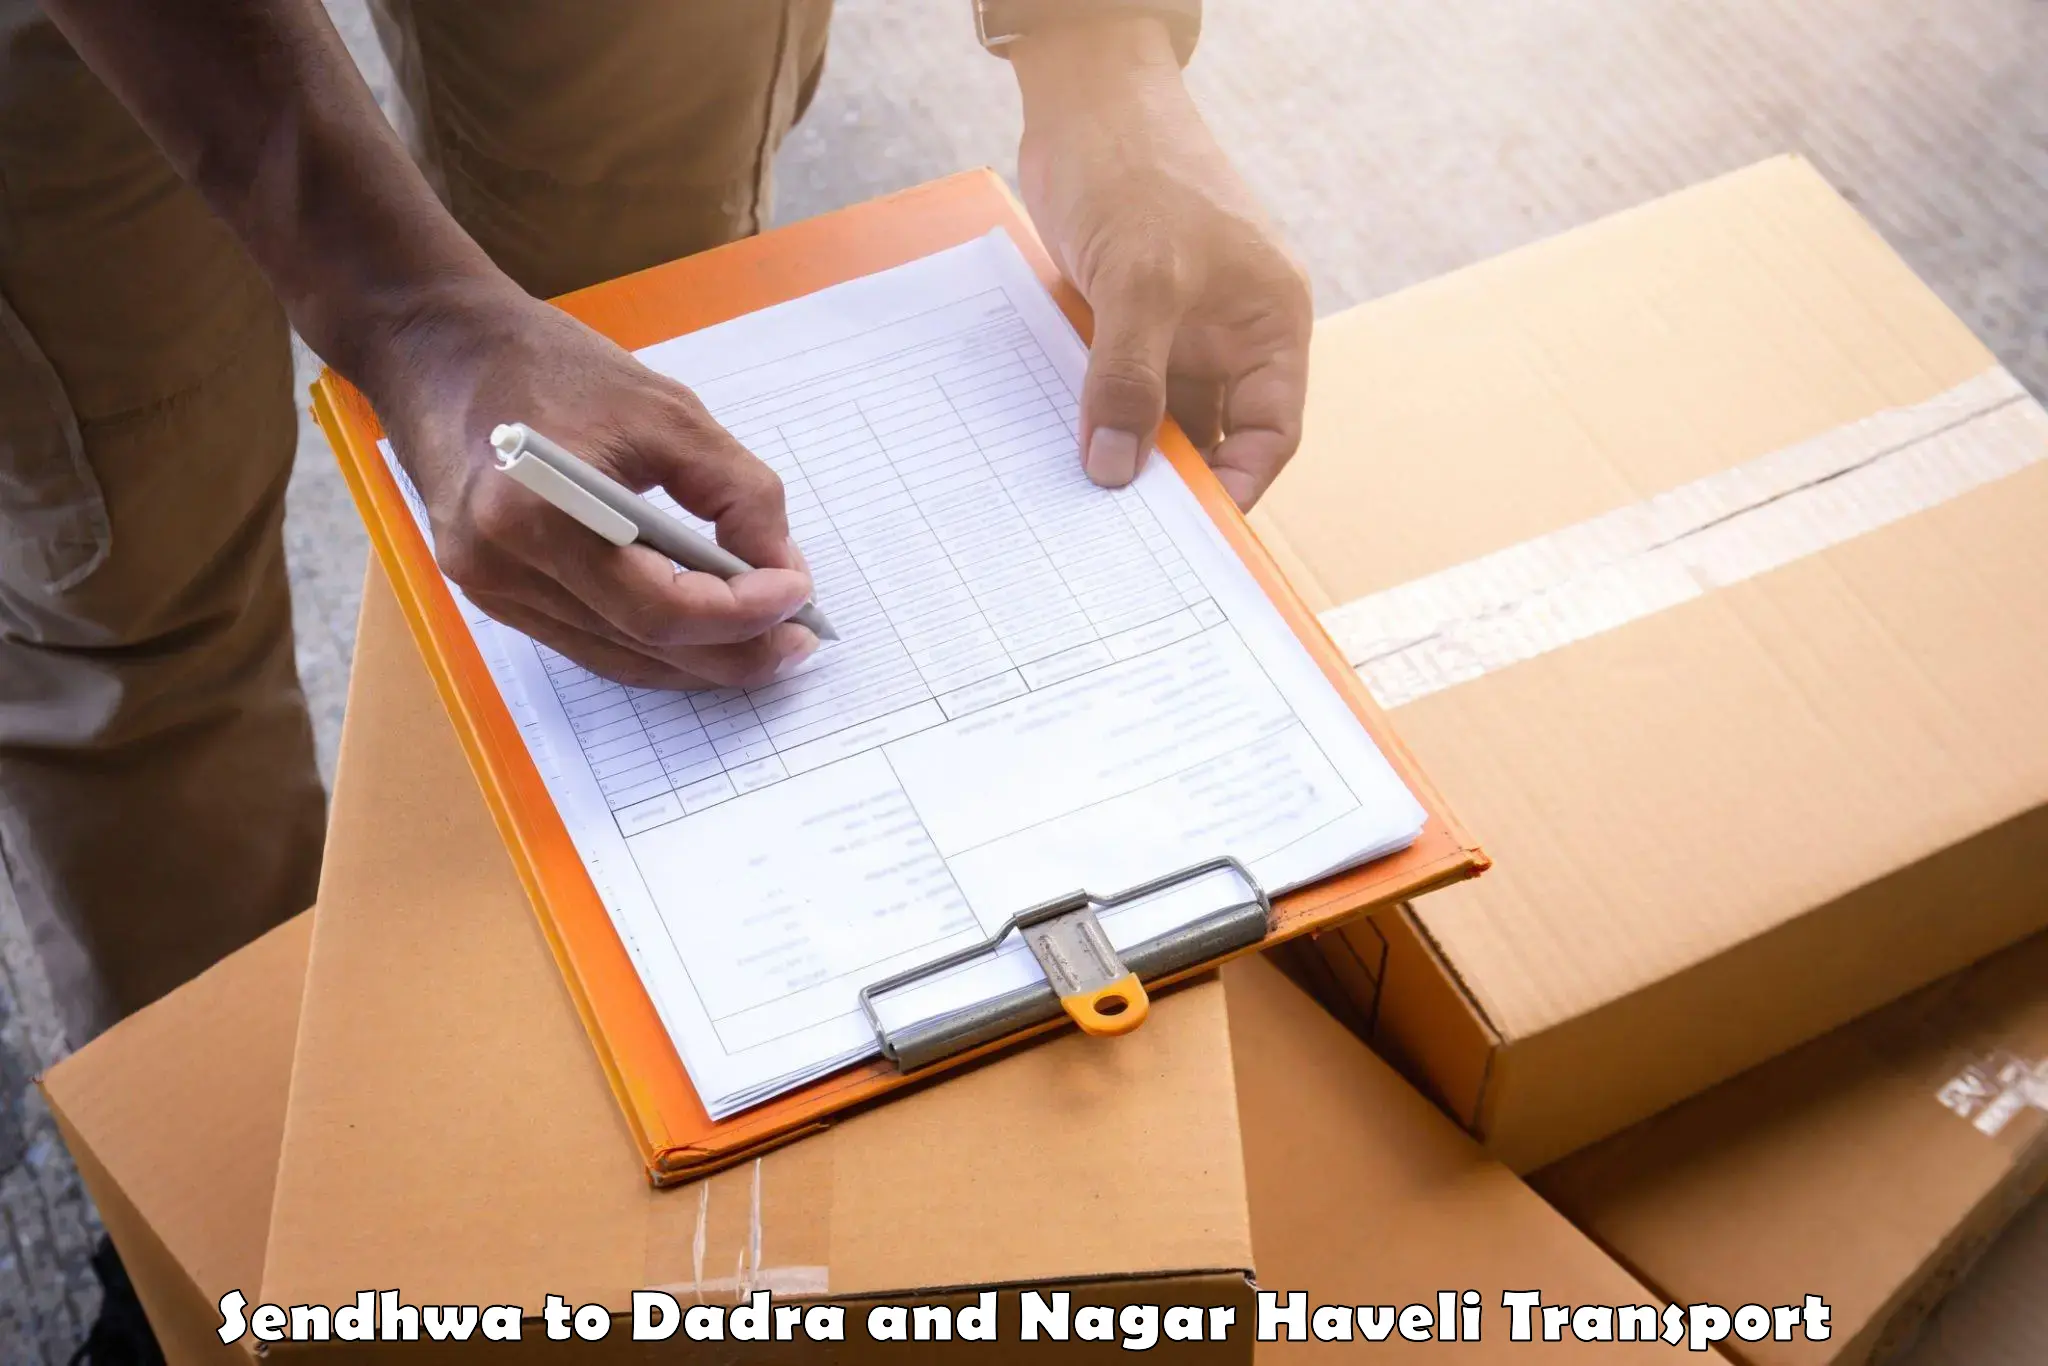 Package delivery services in Sendhwa to Dadra and Nagar Haveli